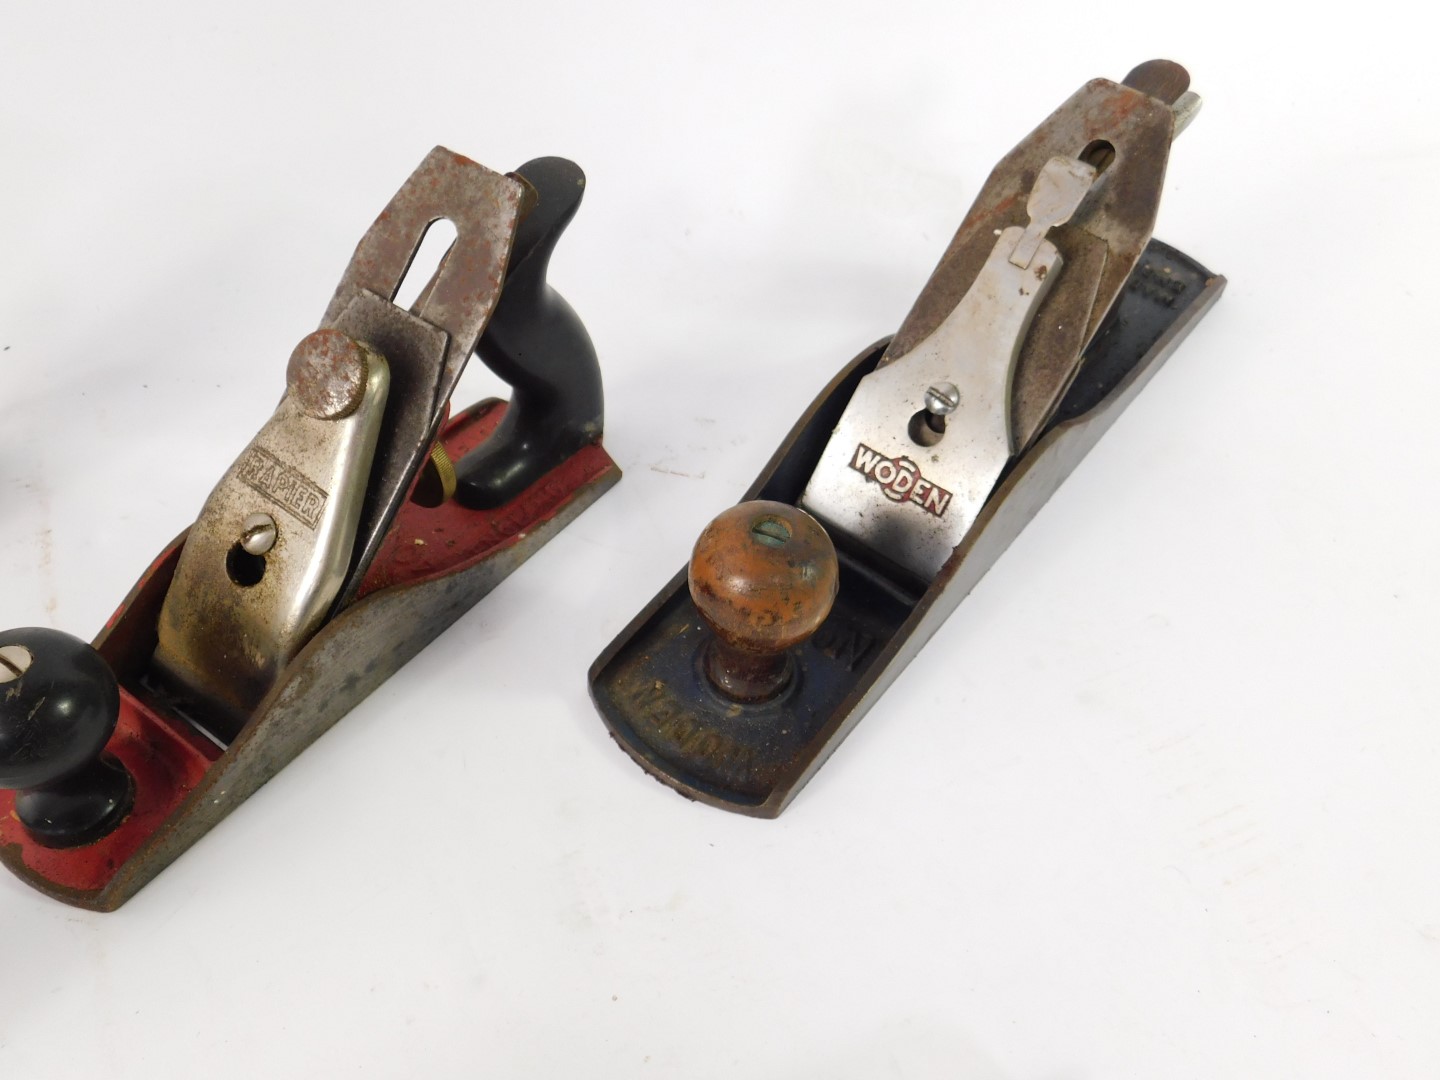 A group of woodworking planes, including Woden, Sargent & Co, Spears, Rapier and Bailey. (6) - Image 3 of 3